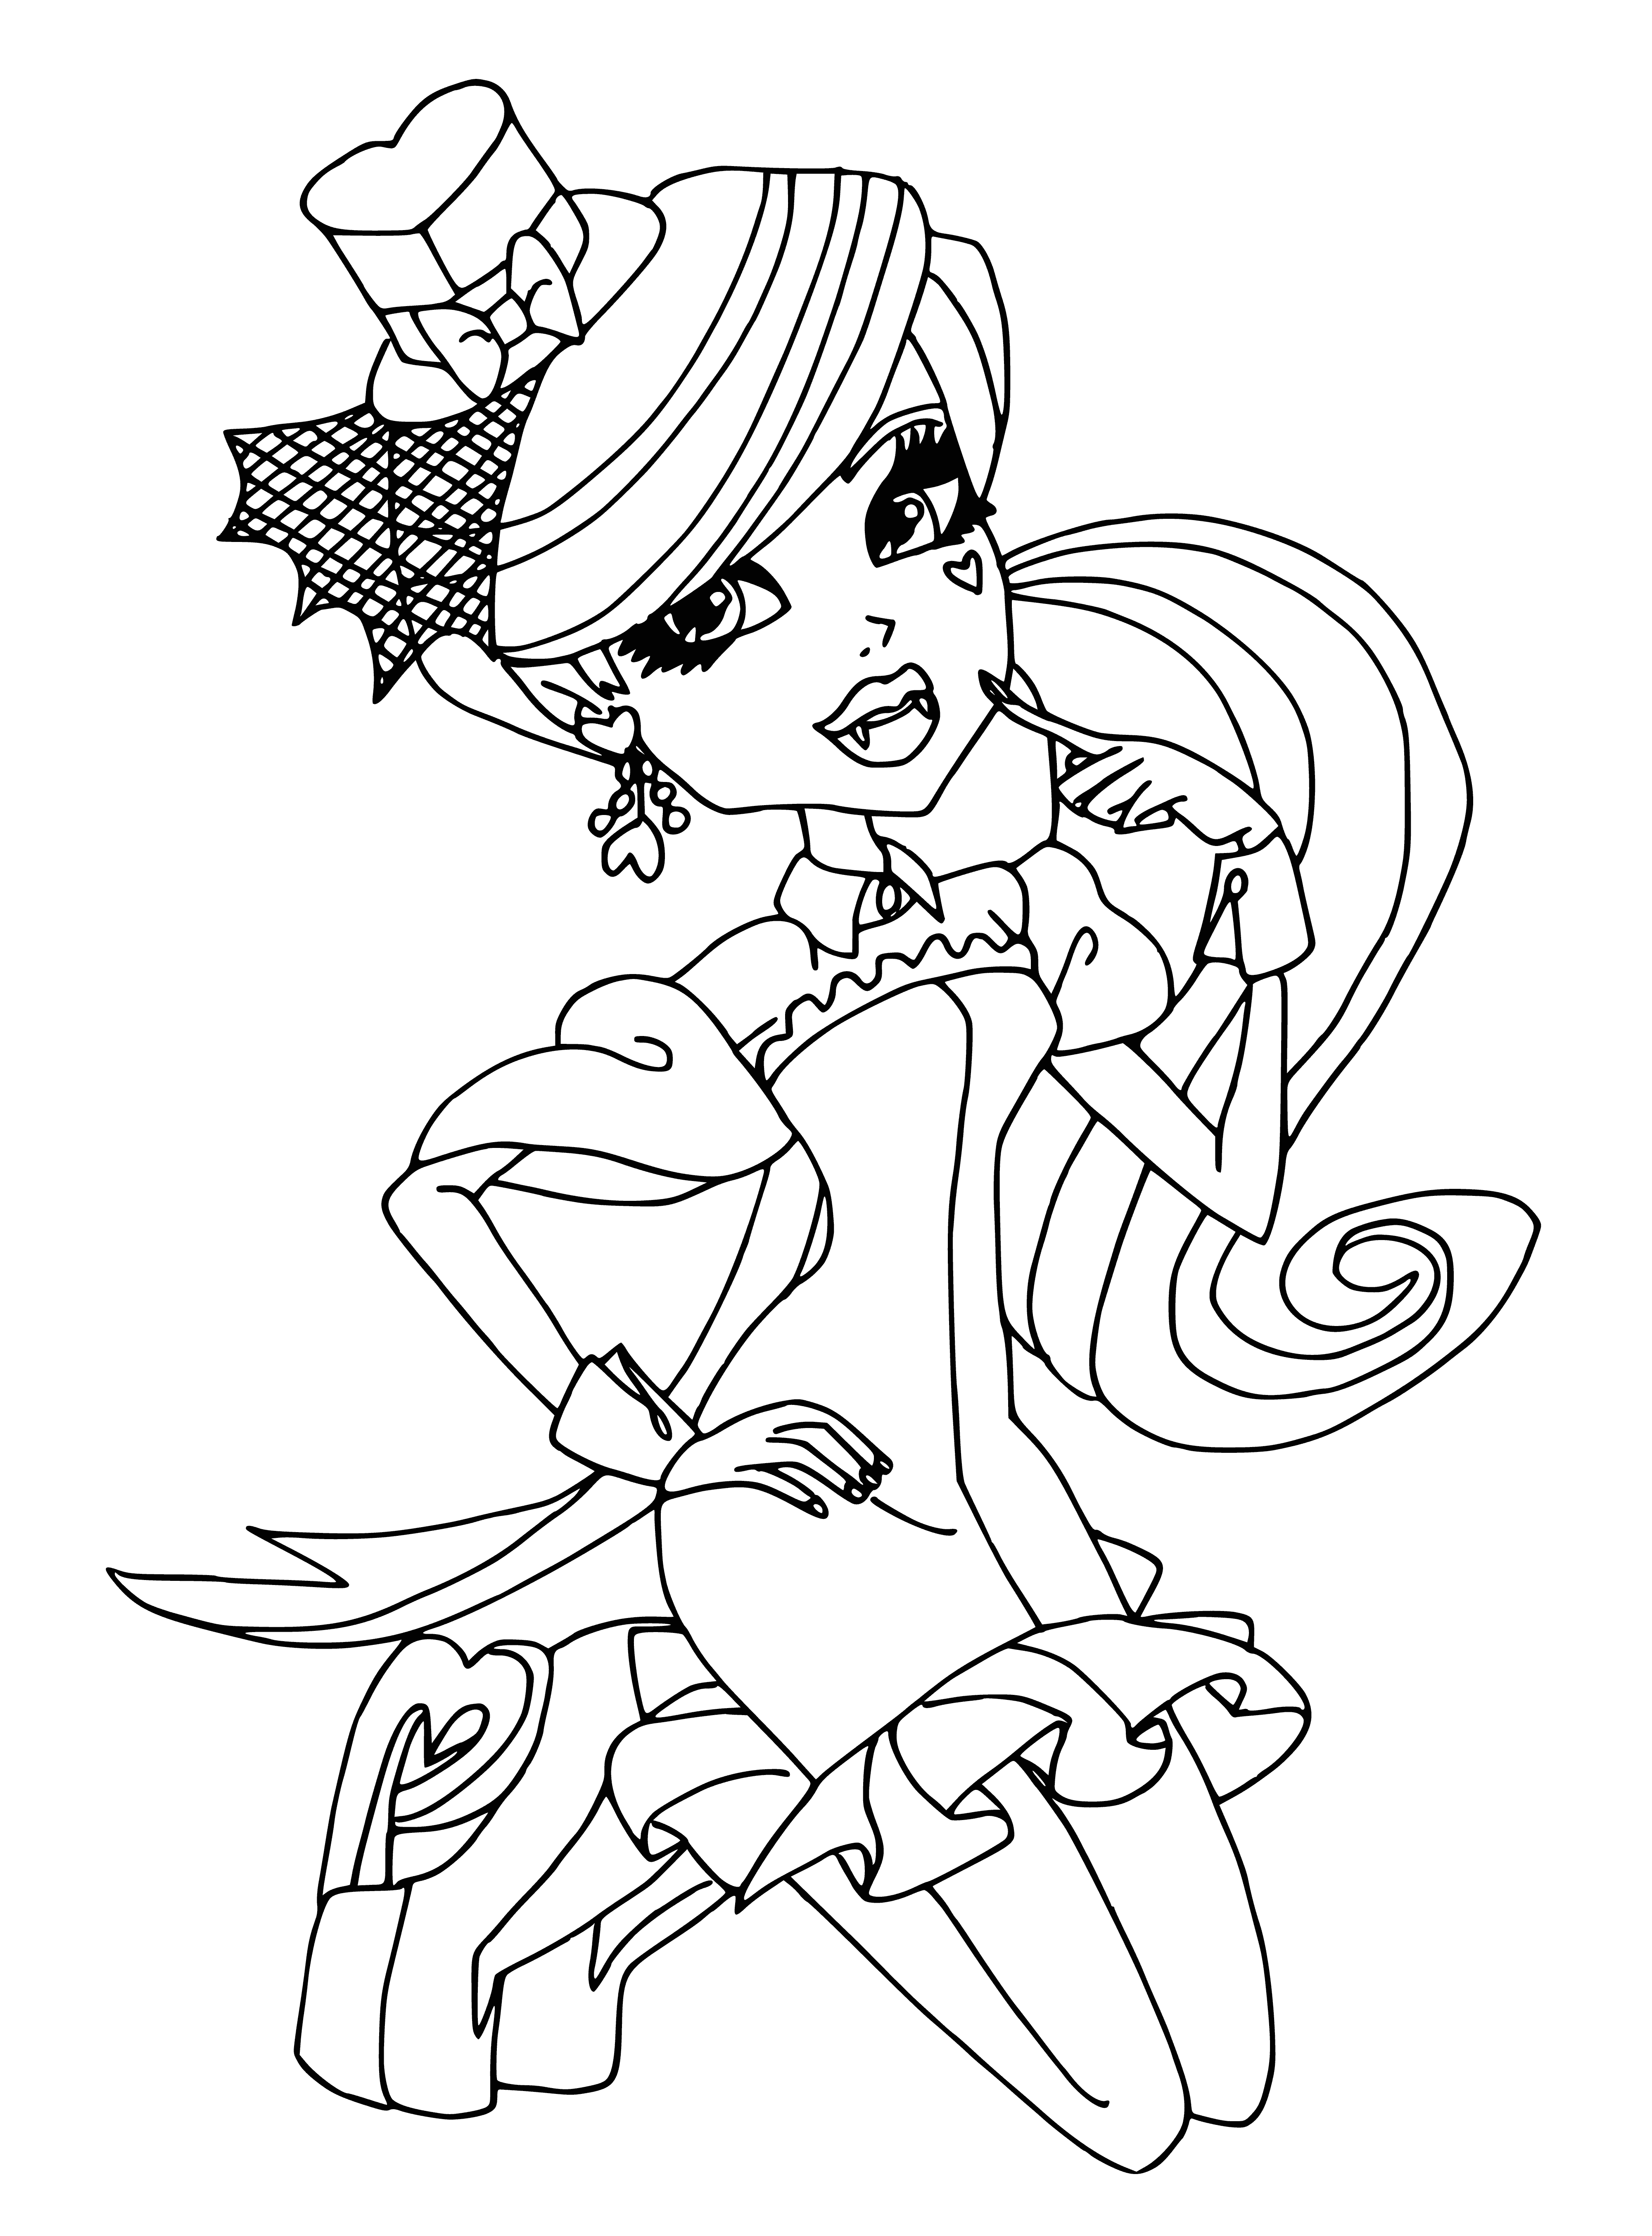 coloring page: Vampire girl in black dress, red scarf & hat, pale skin & red eyes, fangs showing.